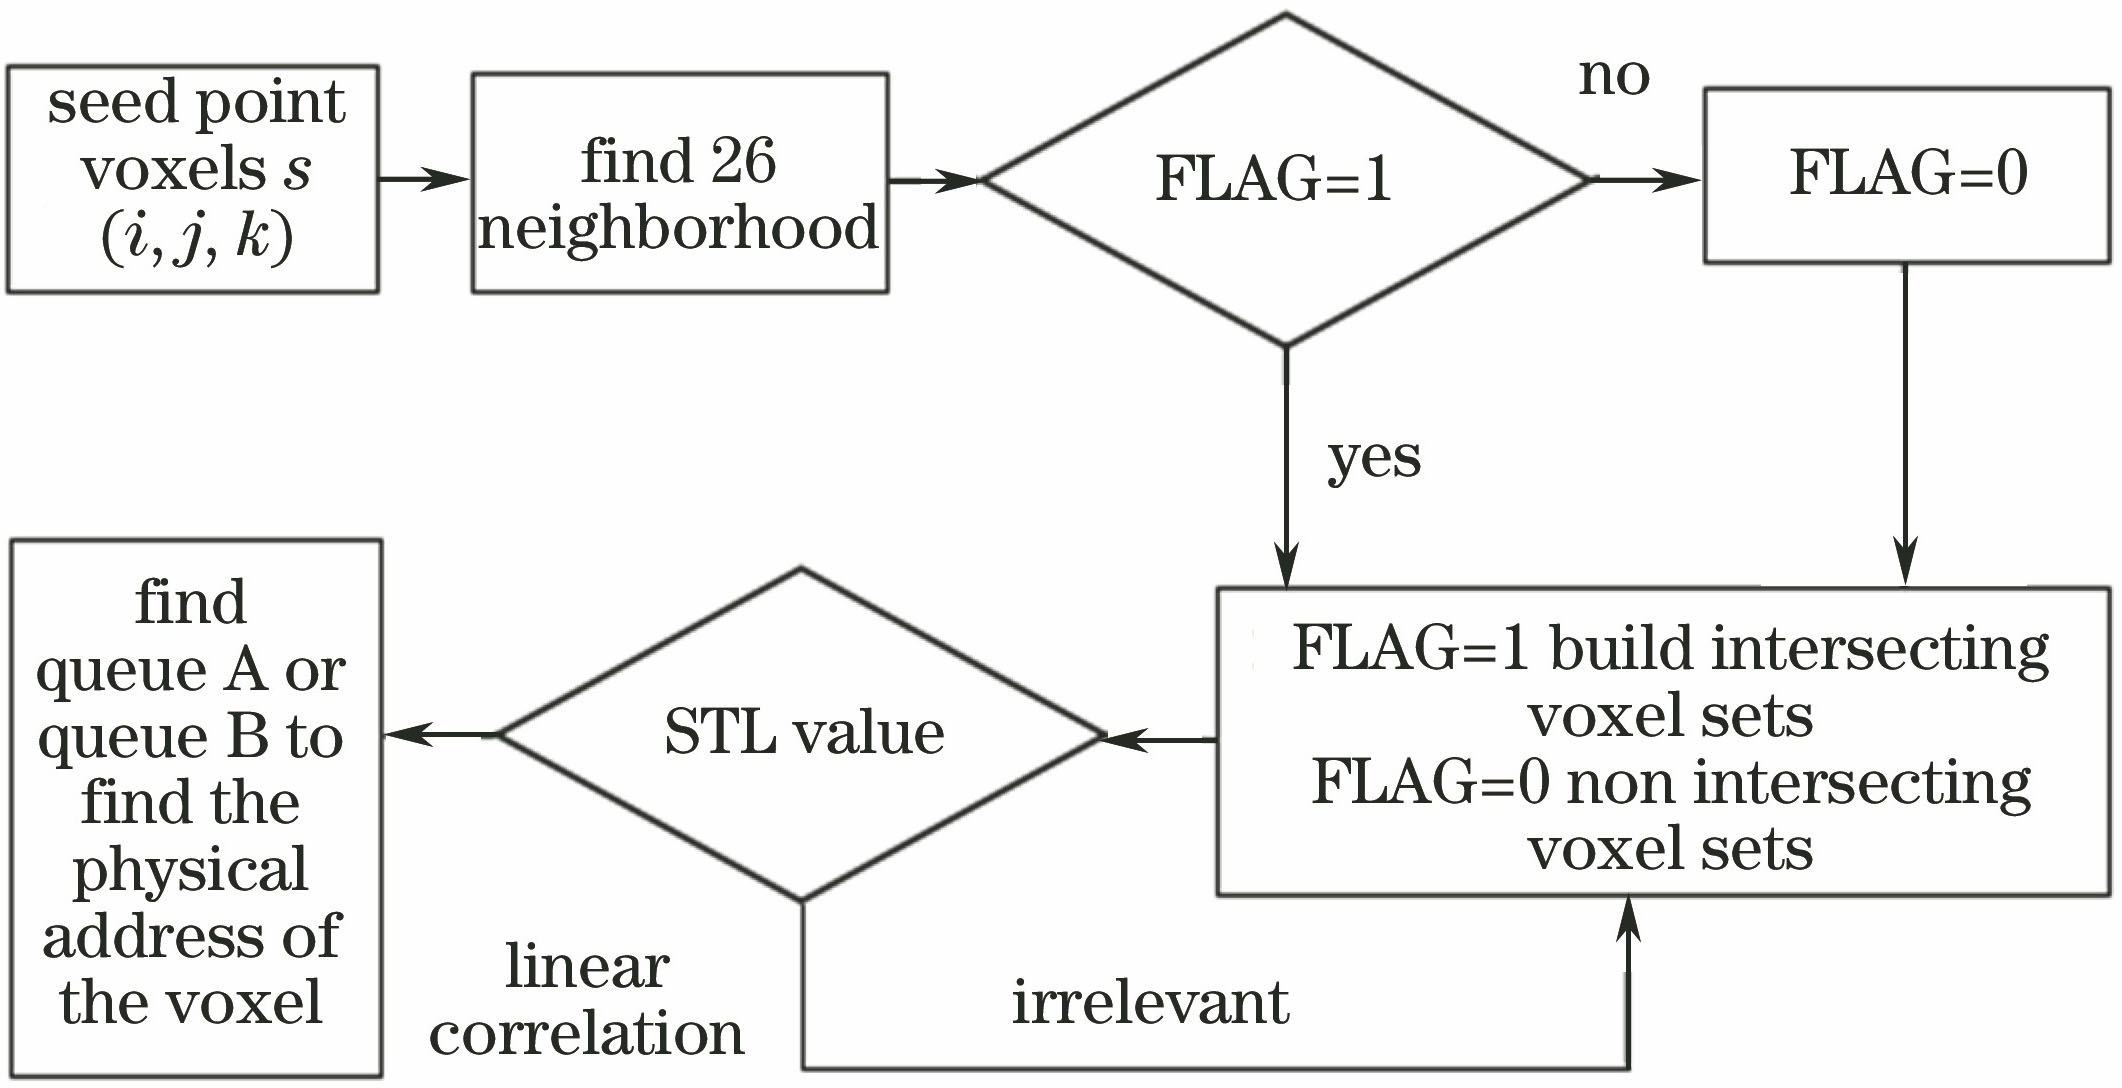 Flow chart of finding the edge of the voxel according to similarity table